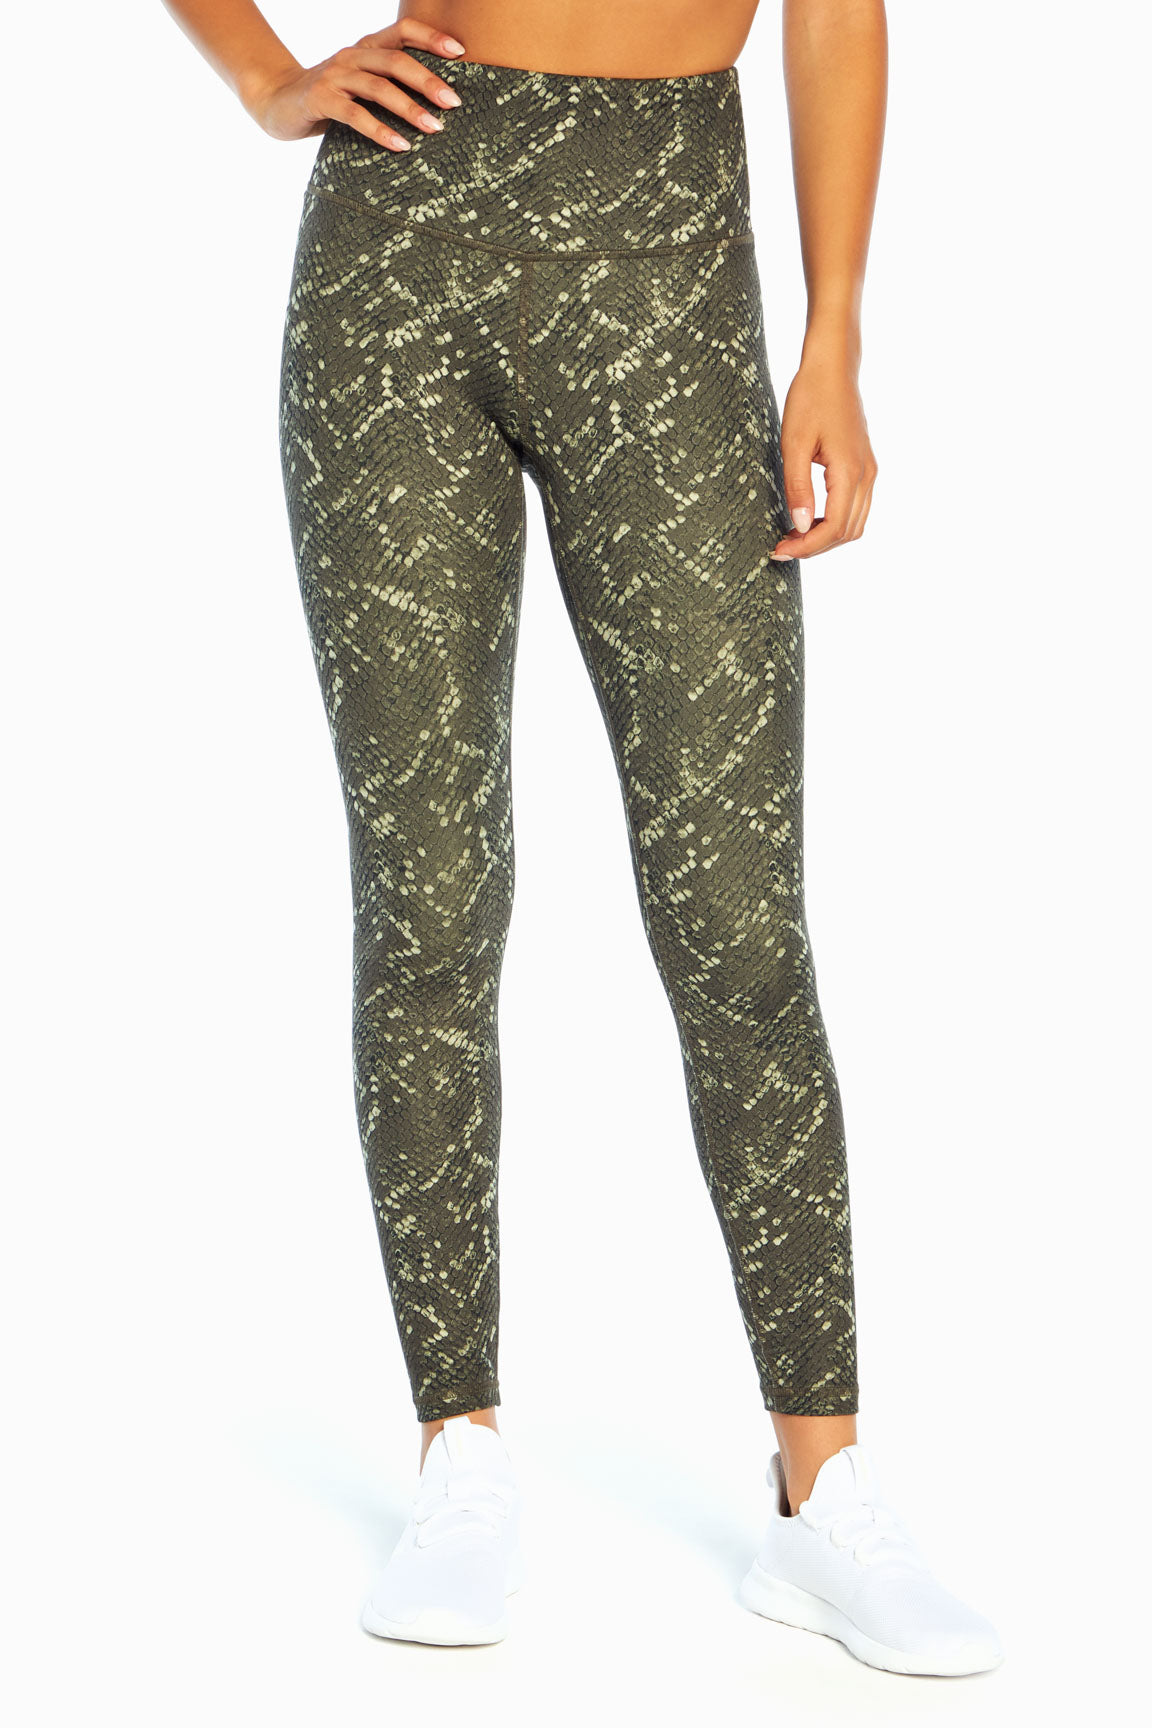 Balance Collection Lux Contender Leggings | Small Watercolor Floral High  Waist